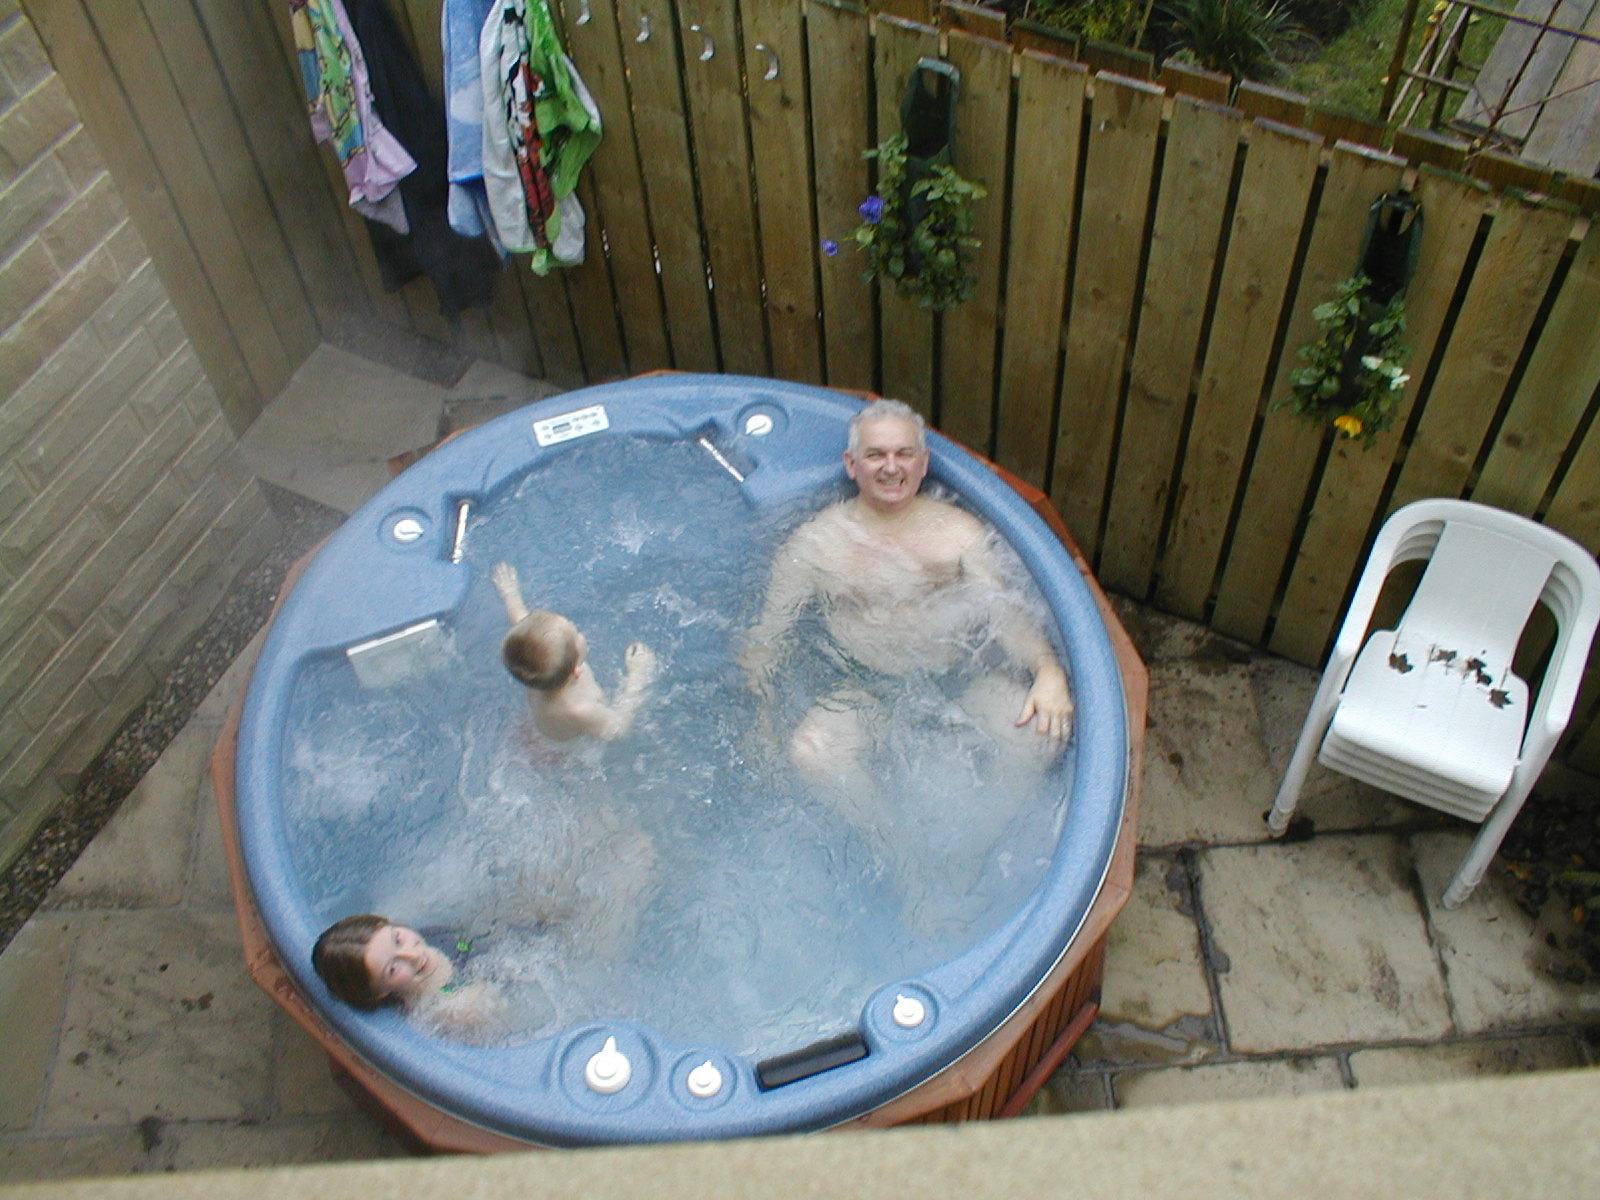 Chris Makin & family relaxing in their hot tub